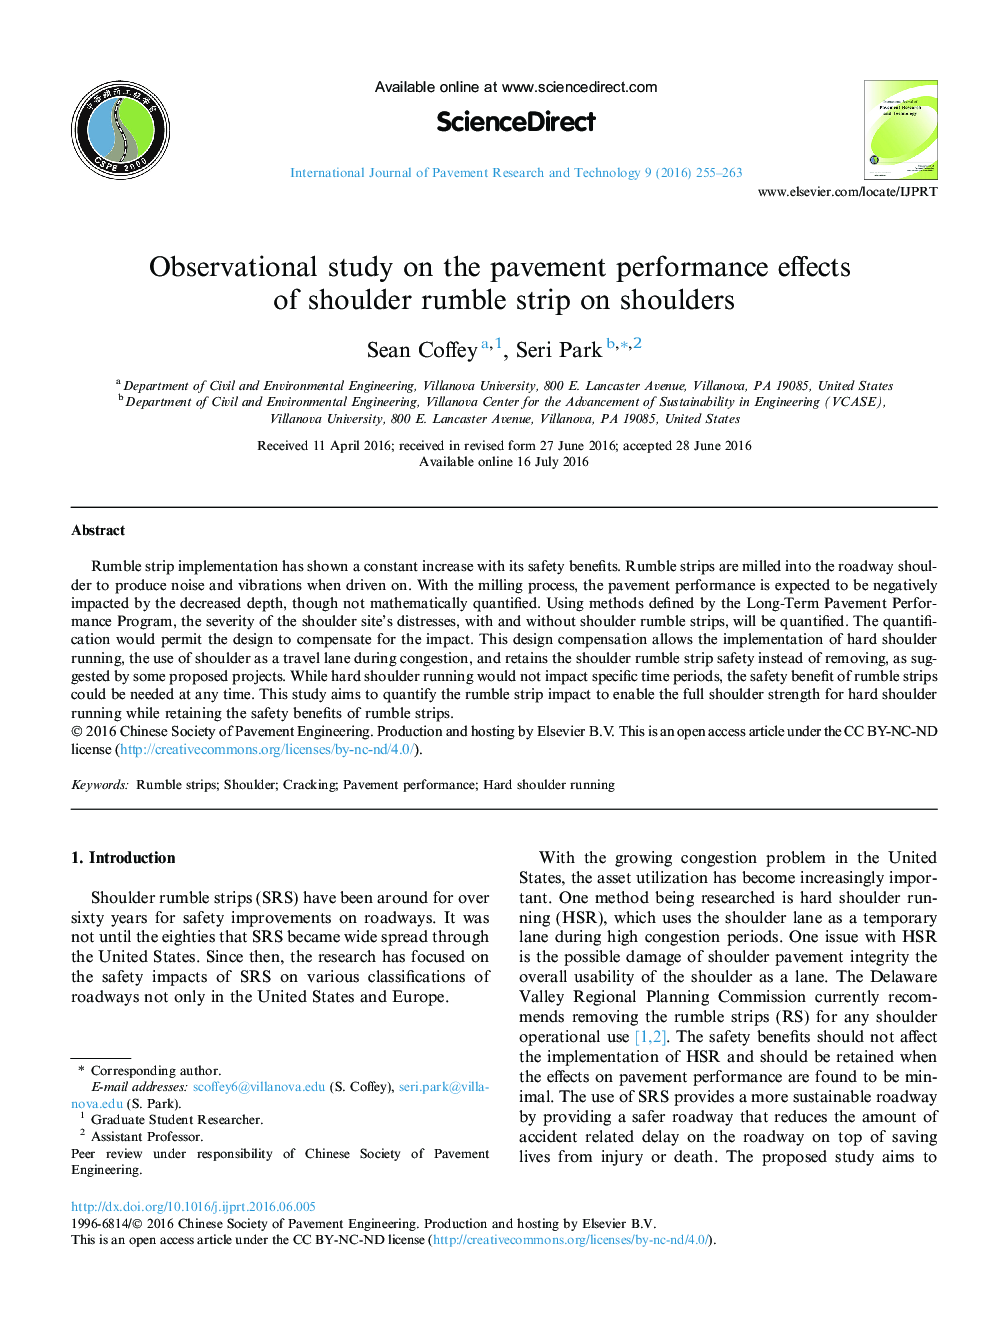 Observational study on the pavement performance effects of shoulder rumble strip on shoulders